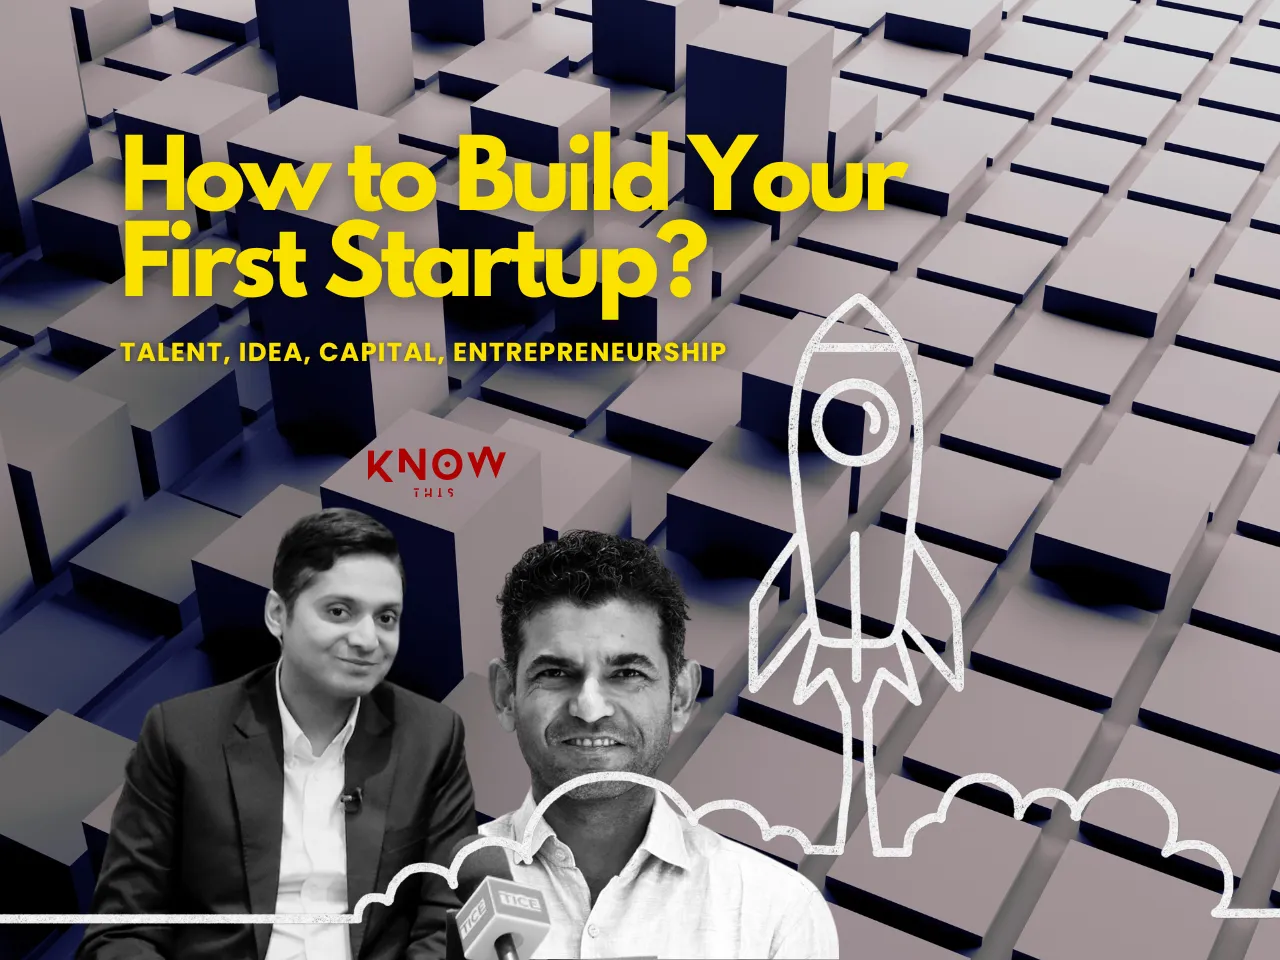 How to Build Your First Startup? Read Before You Start Up